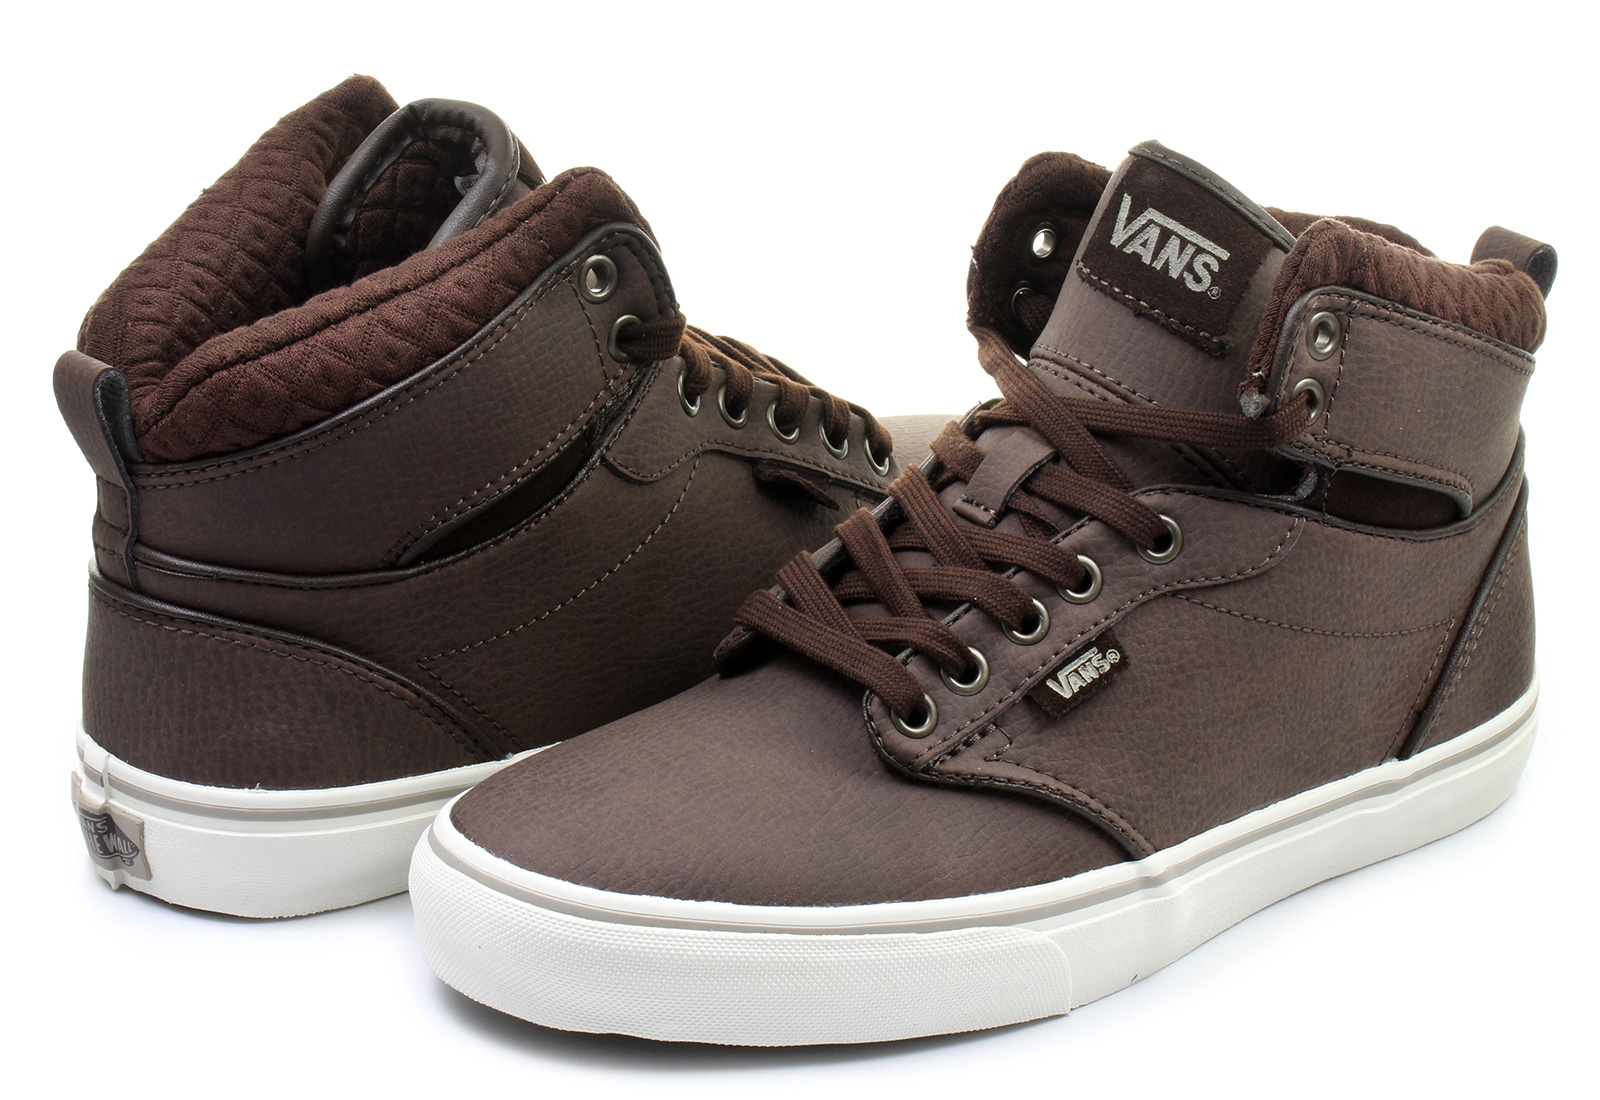 Vans Sneakers - Atwood Hi - VVG3GJ2 - Online shop for sneakers, shoes